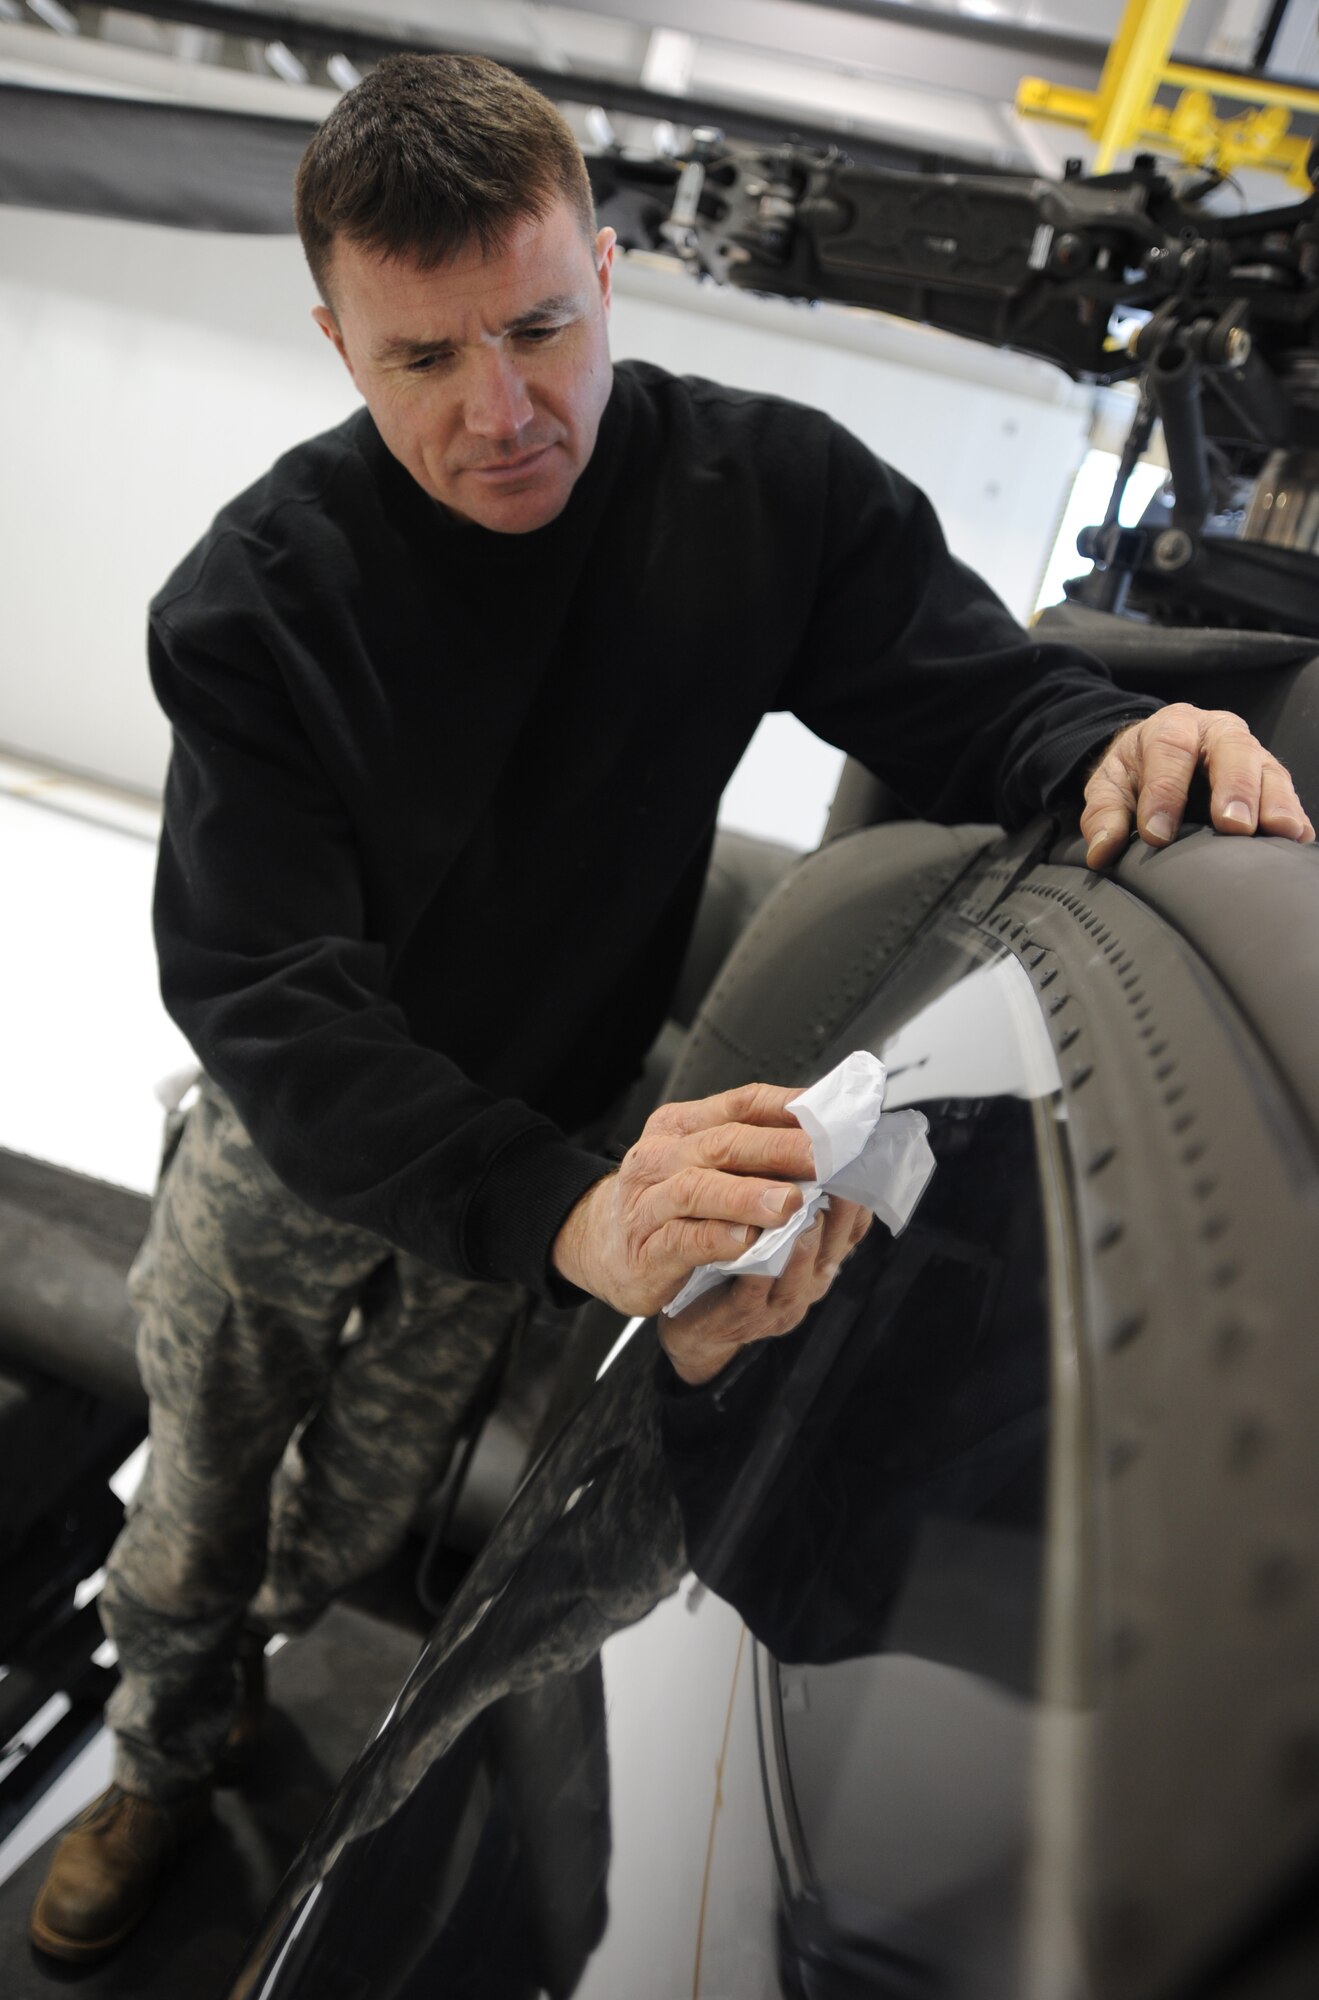 WHITEMAN AIR FORCE BASE, Mo. -- U.S. Army Sgt. Brian Wood, 1-135th Attack Reconnaissance Battalion crew chief, washes the Plexiglass window of an AH 64D Apache Longbow, Jan. 16. The acrylic design on the Apache windows helps keep pilots safe in case an emergency evacuation is necessary. (U.S. Air Force photo/ Staff Sgt. Nick Wilson) (Released)